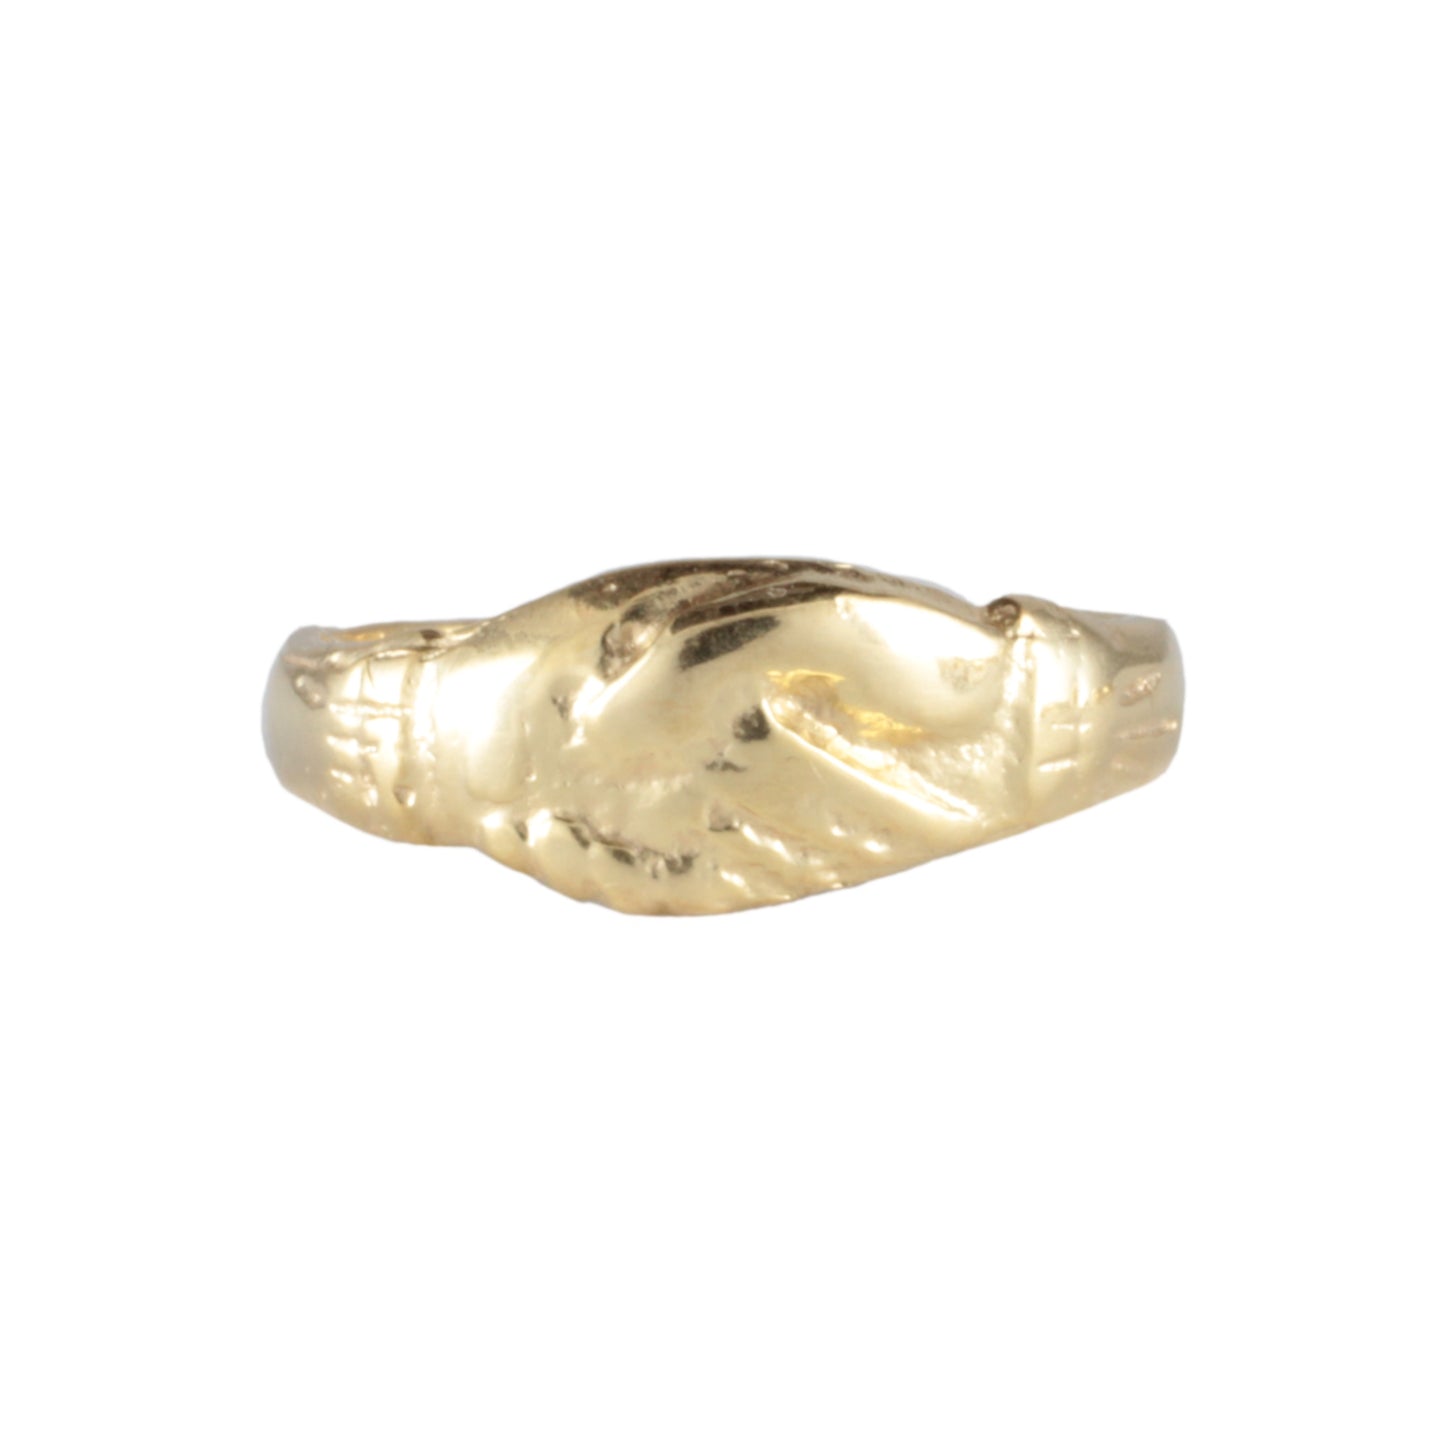 'Ludus' 22ct Clasped Hands Fede Ring C12th Medieval style